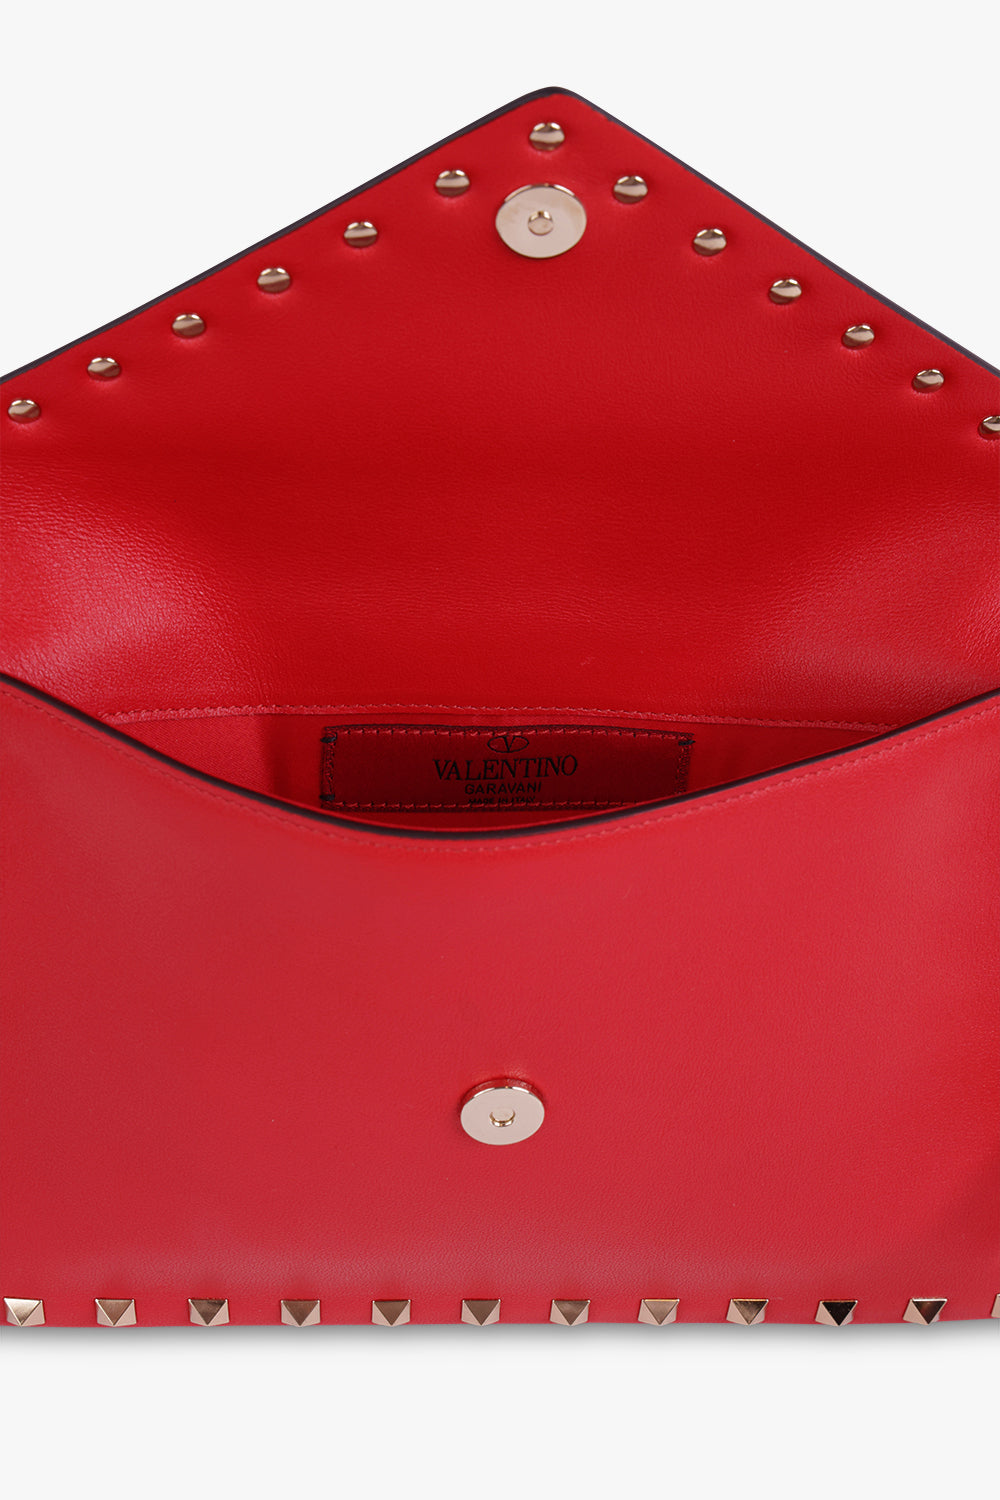 RvceShops Revival | Brown Valentino Leather Crossbody Bag Crossbody Bag | RED  Valentino ruffle-trim dress